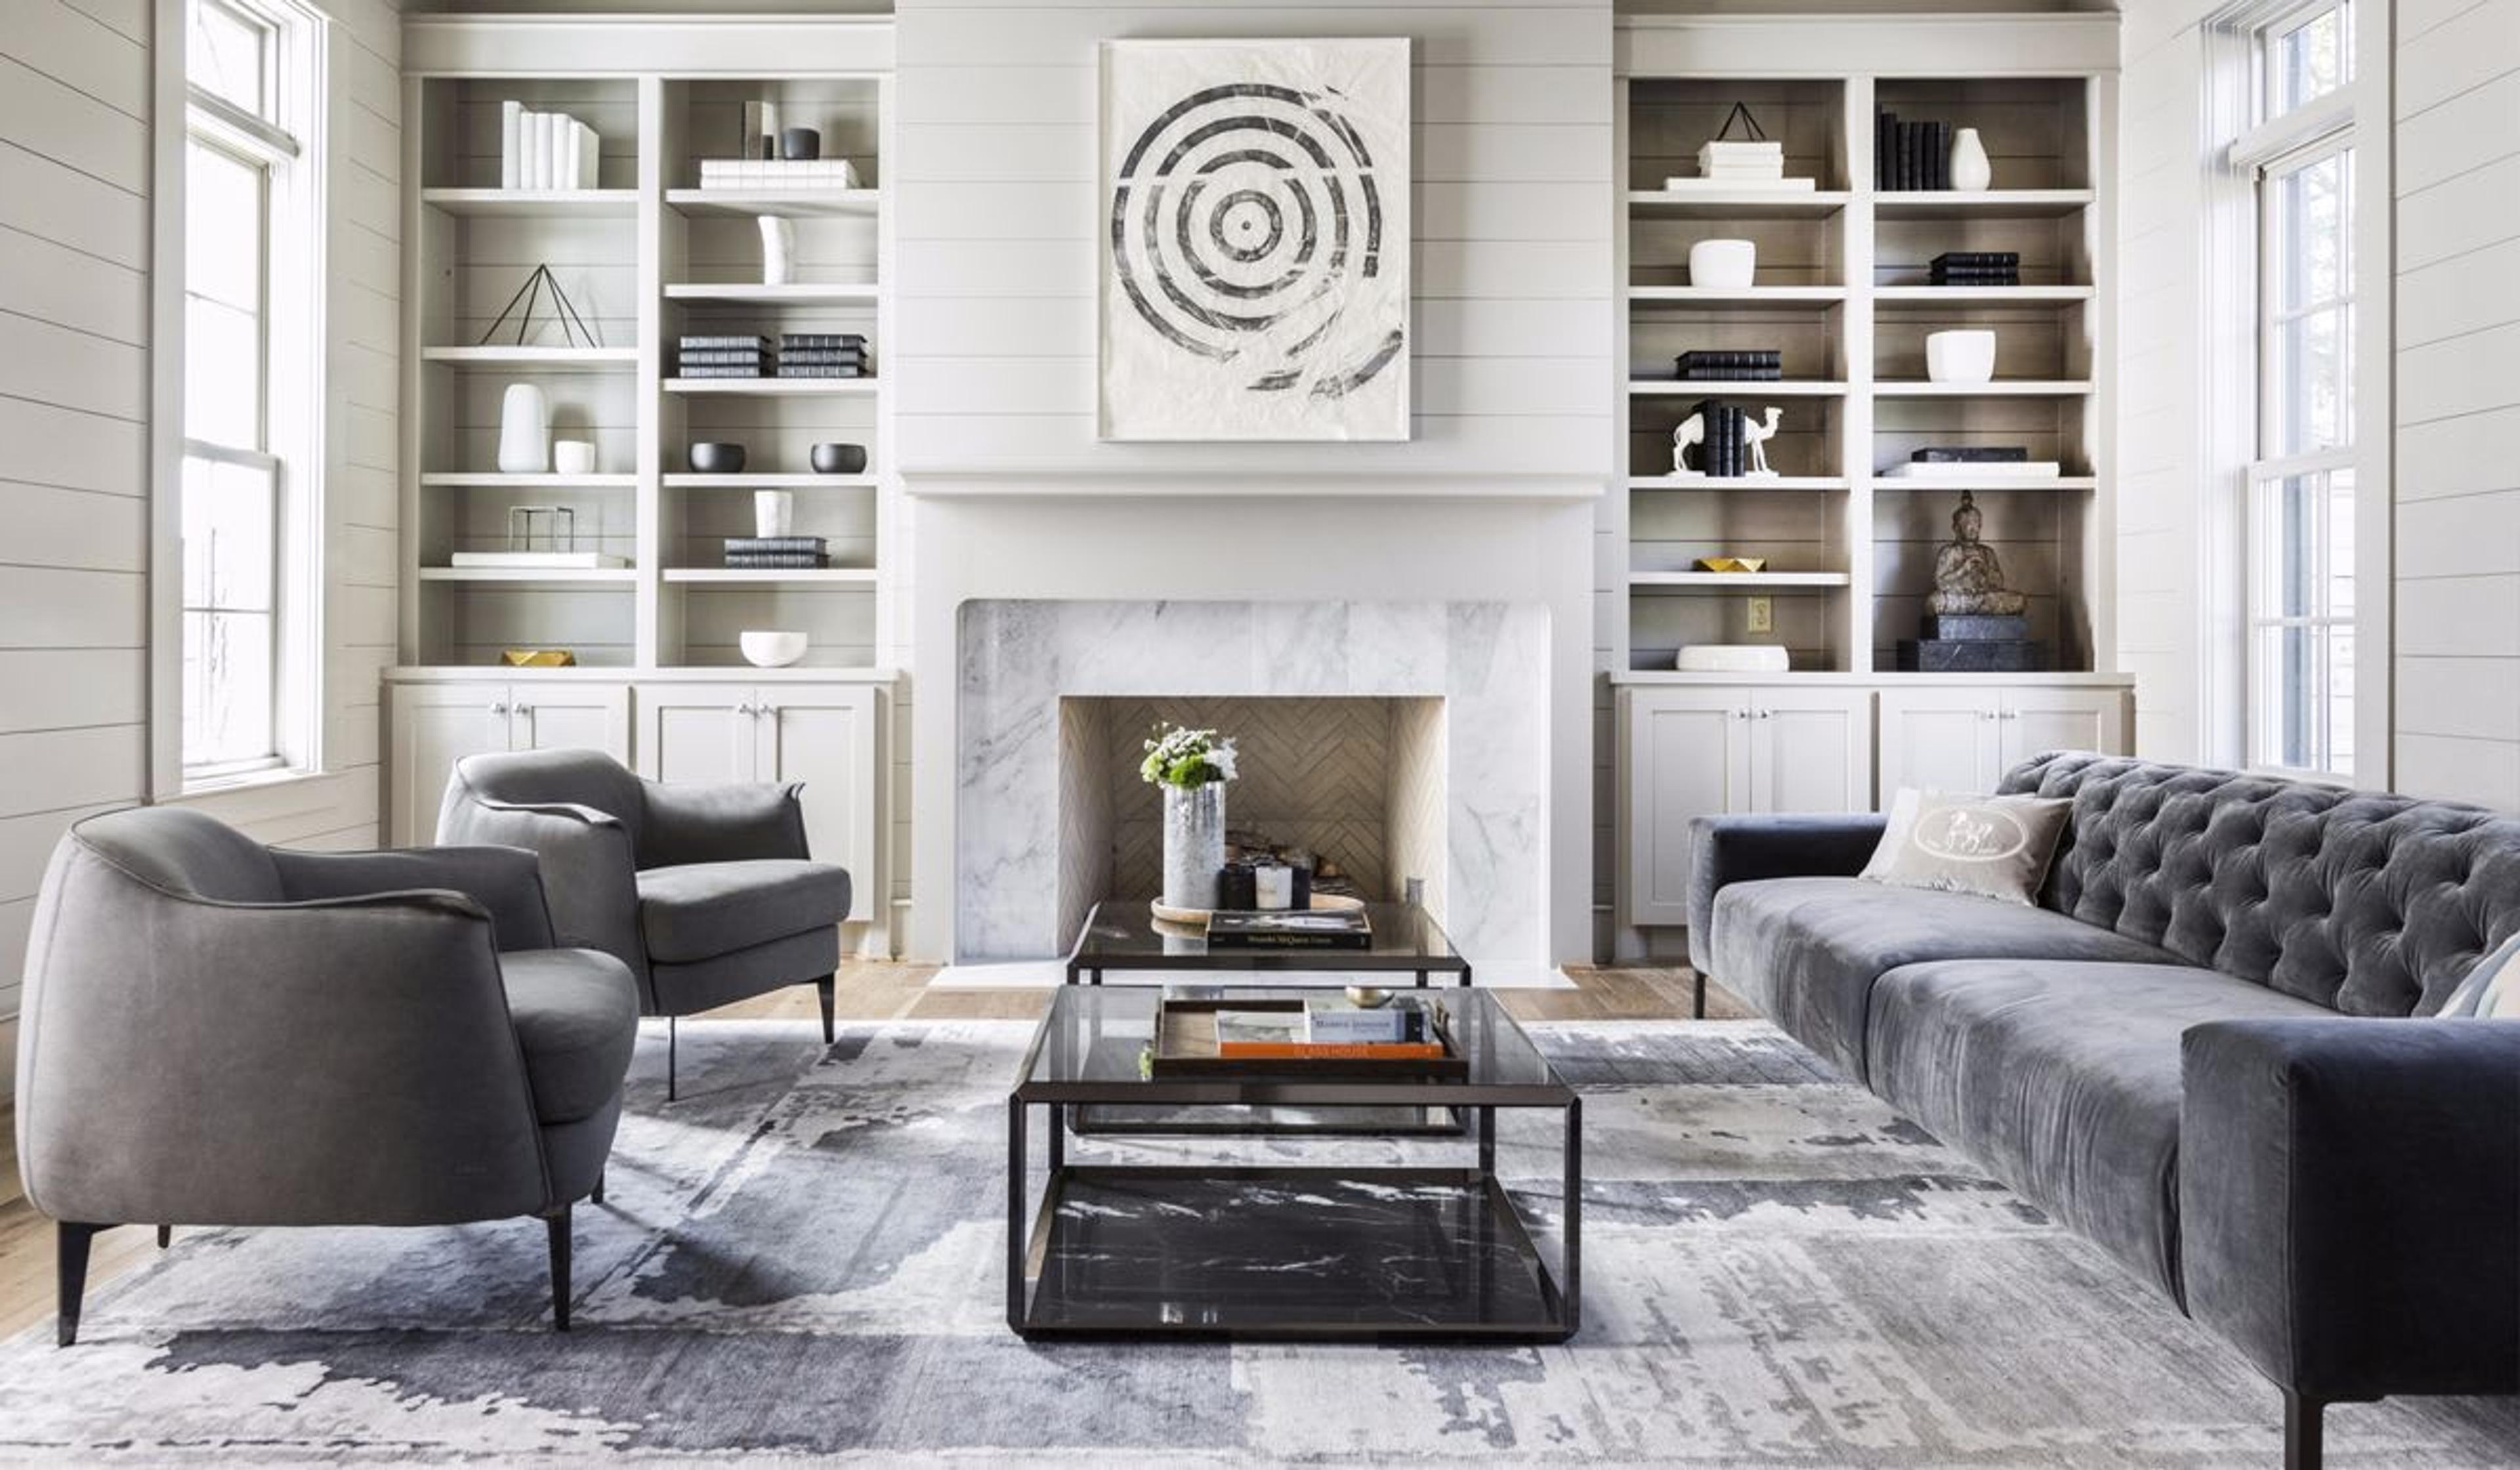 This living room was created for renowned chef Sandra Lee. Due to the beautiful millwork and architectural elements in the house, Nina opted to infuse neutral and muted colors to the space to bring out details in the home while still creating a sense of comfort. 